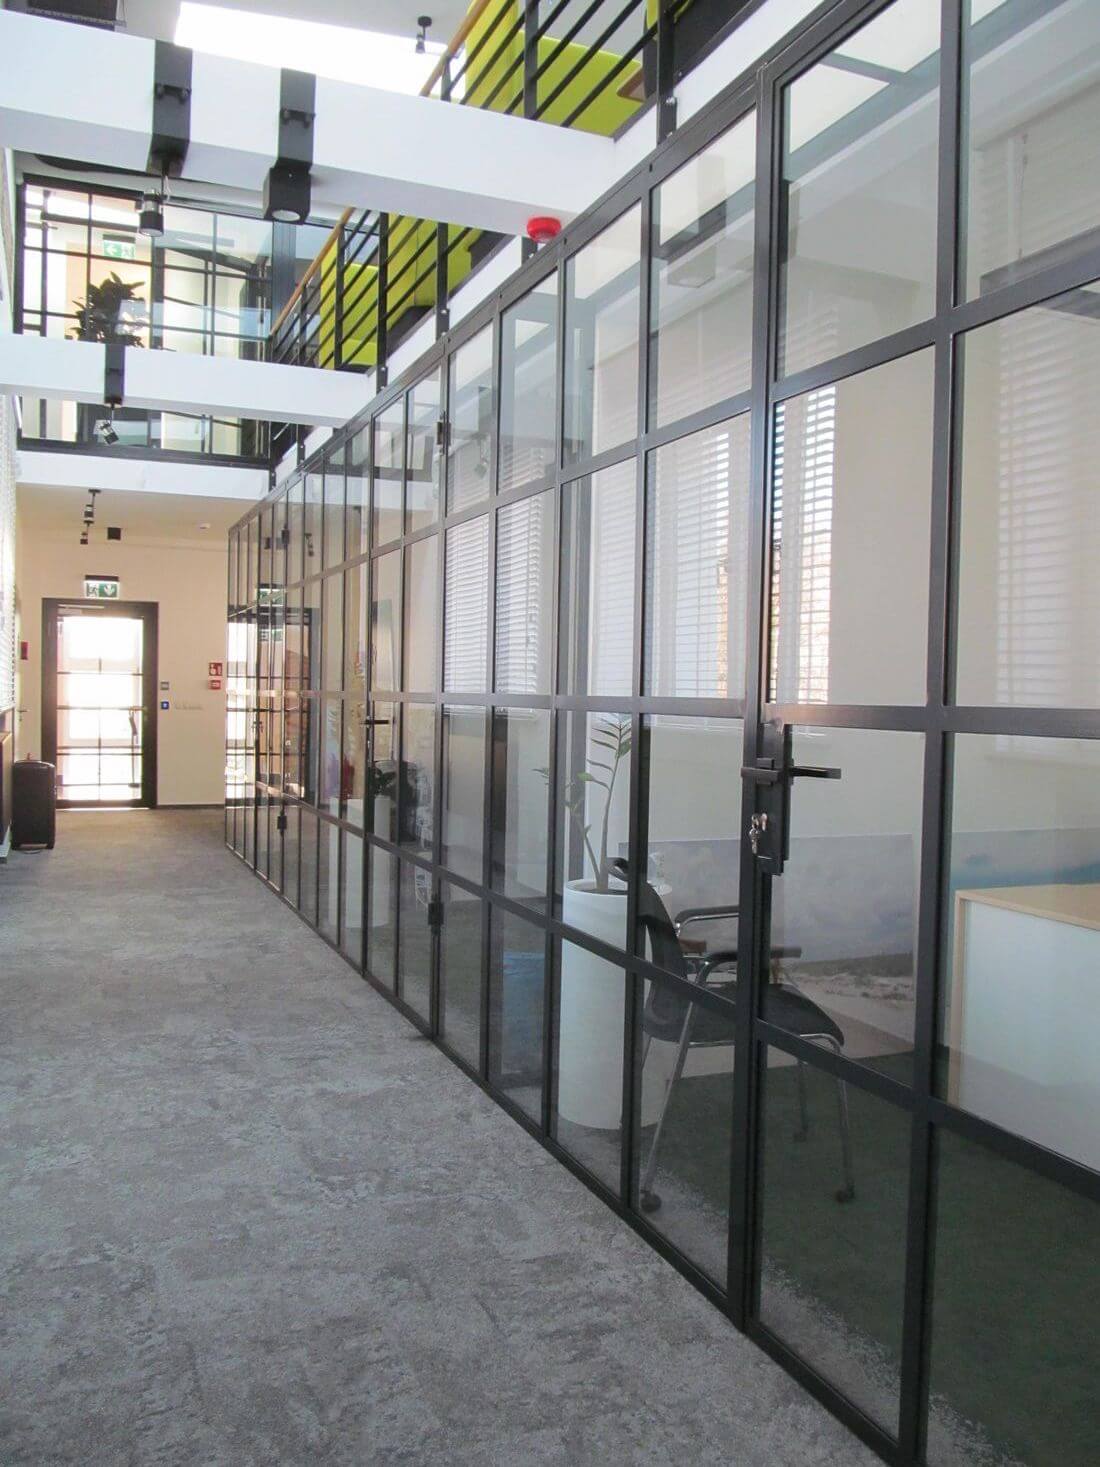 Loft Door and Loft Wall System in industrial style in reinforced glass and structural steel